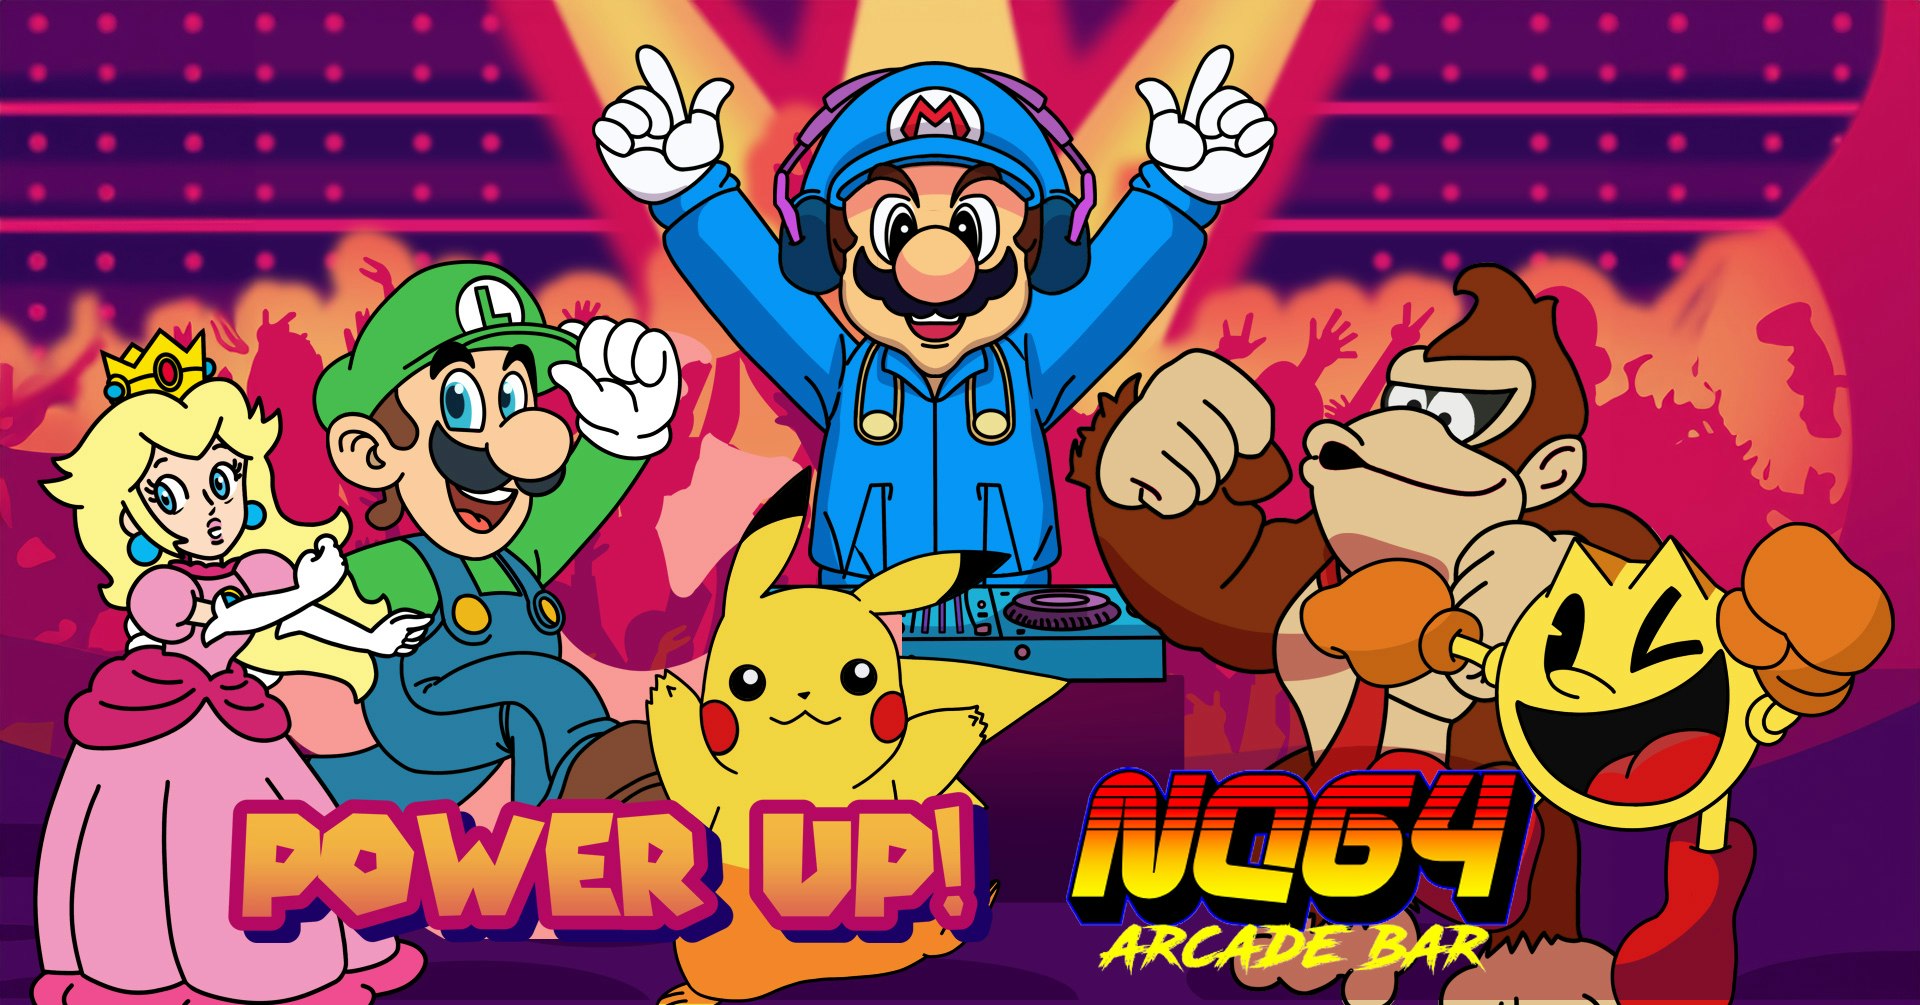 Power Up Party at NQ64